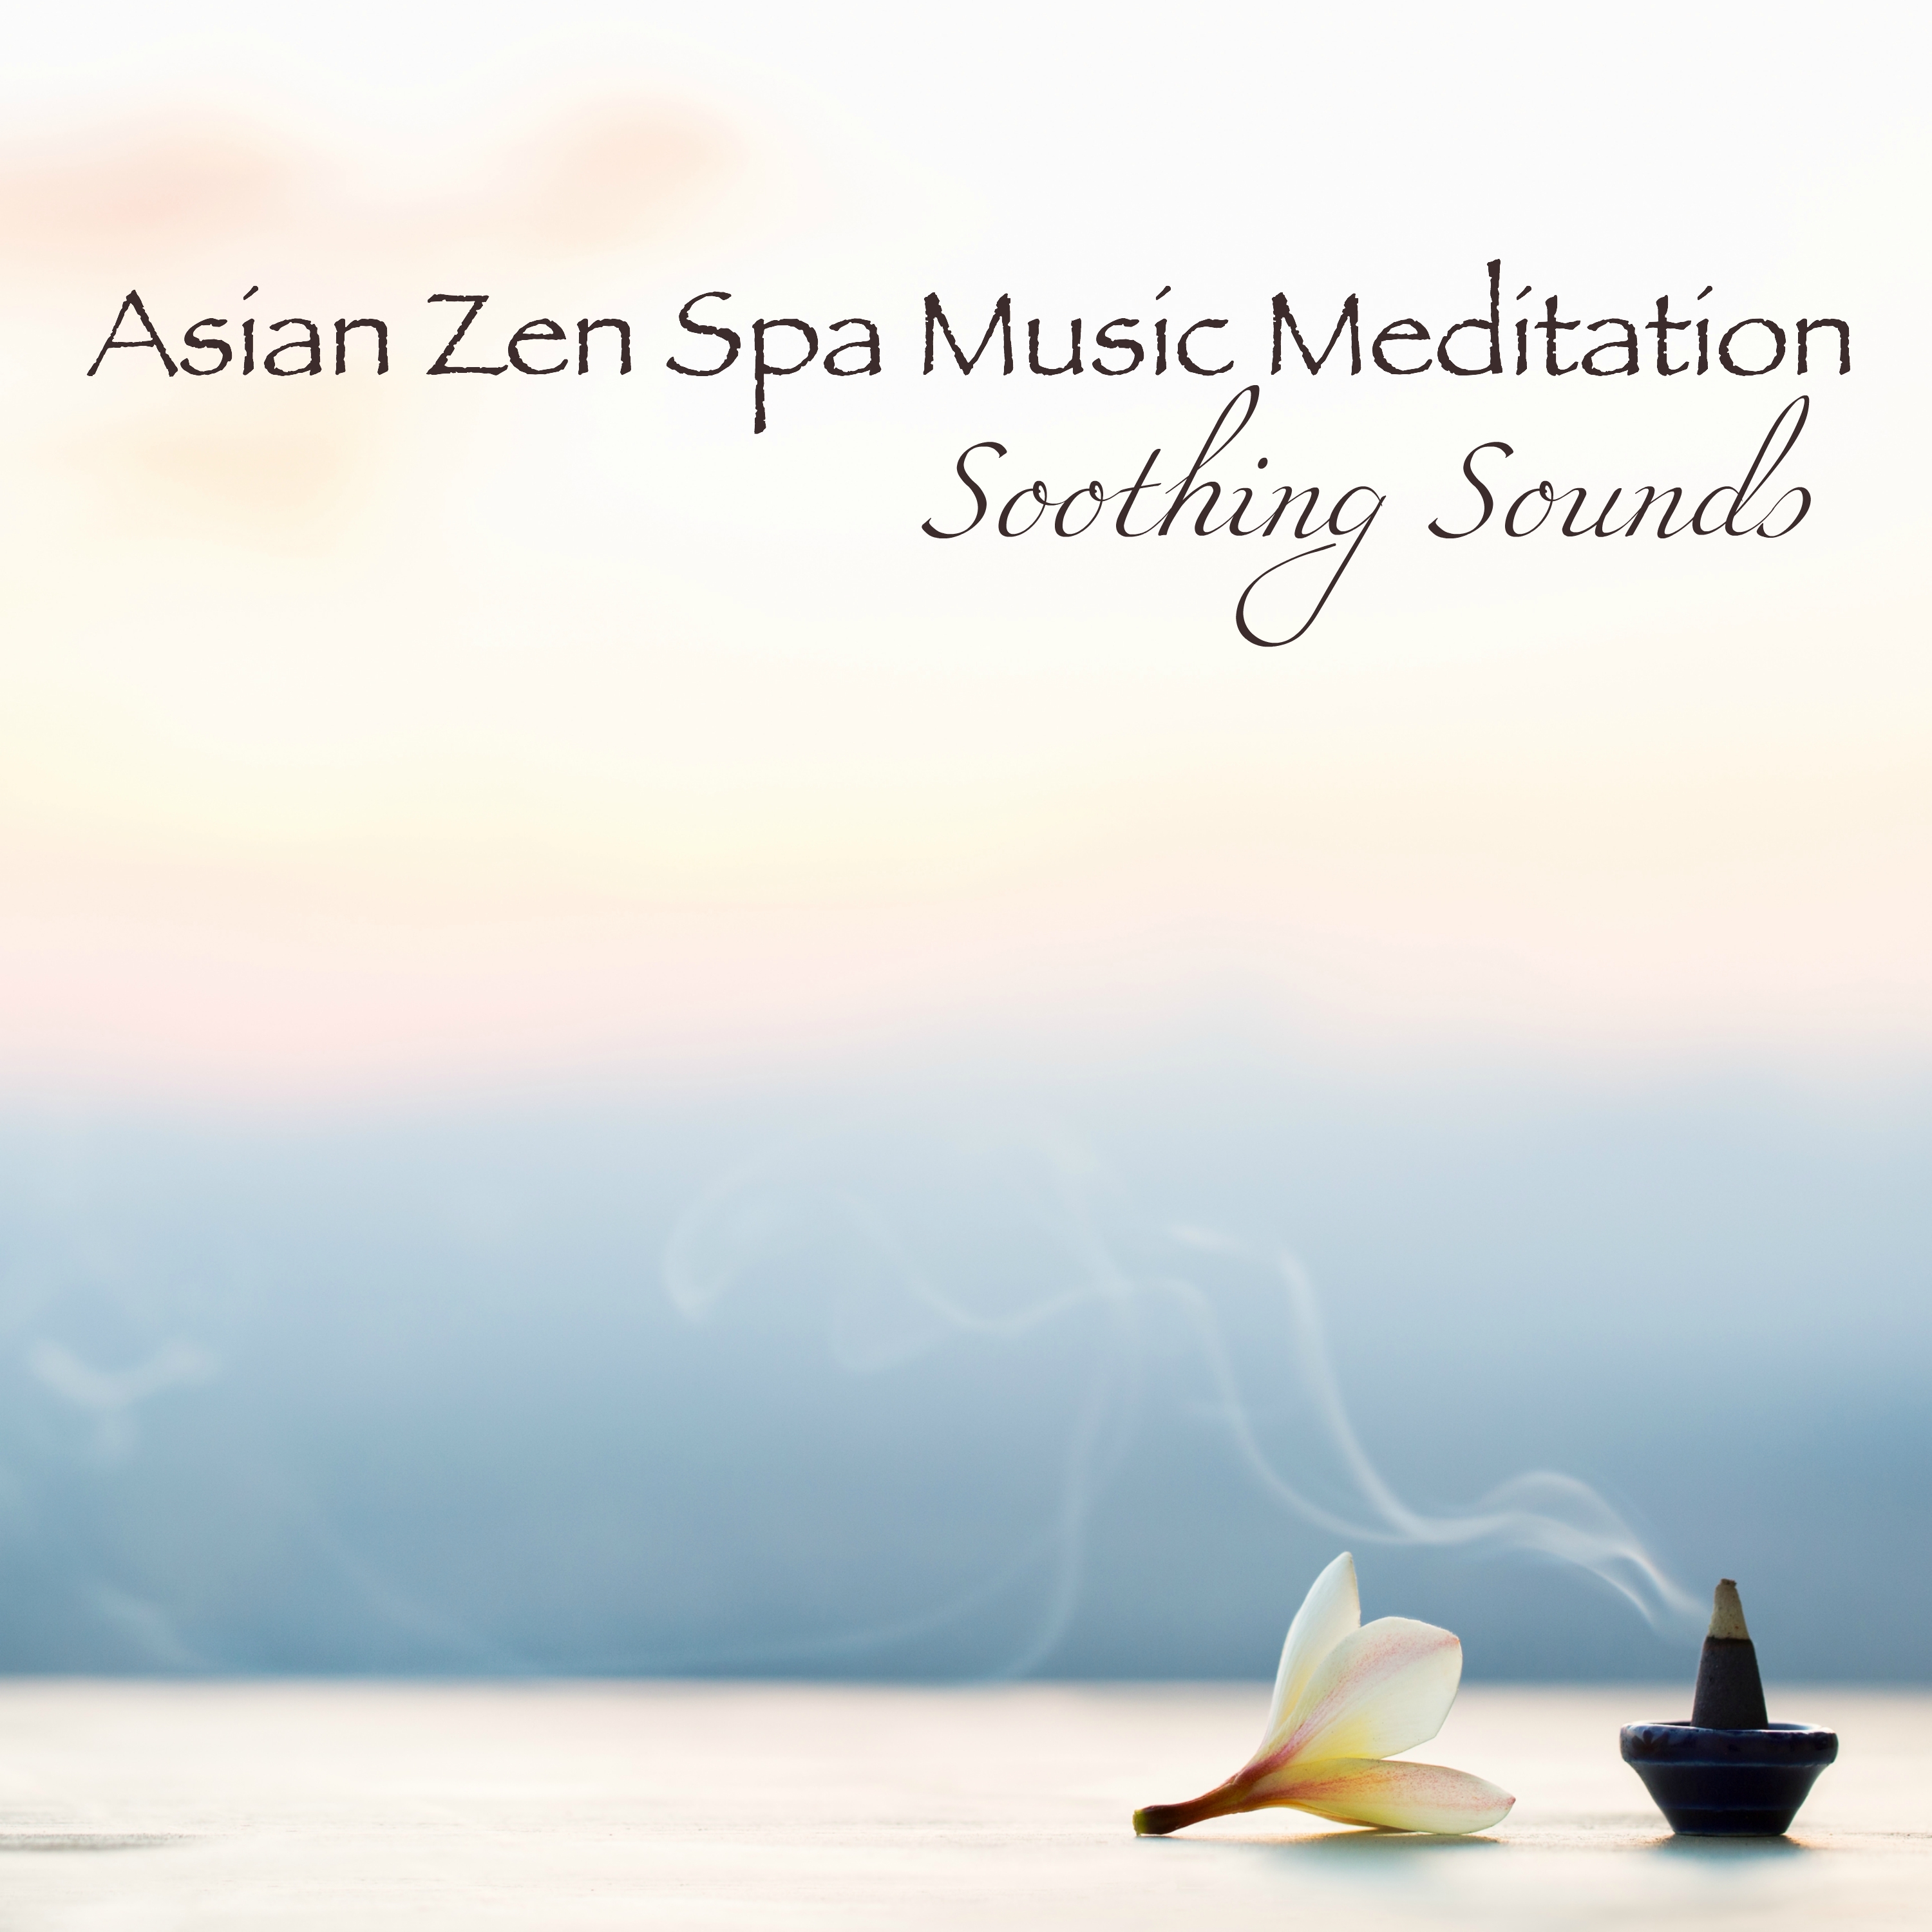 Asian Zen Spa Music Meditation Soothing Sounds